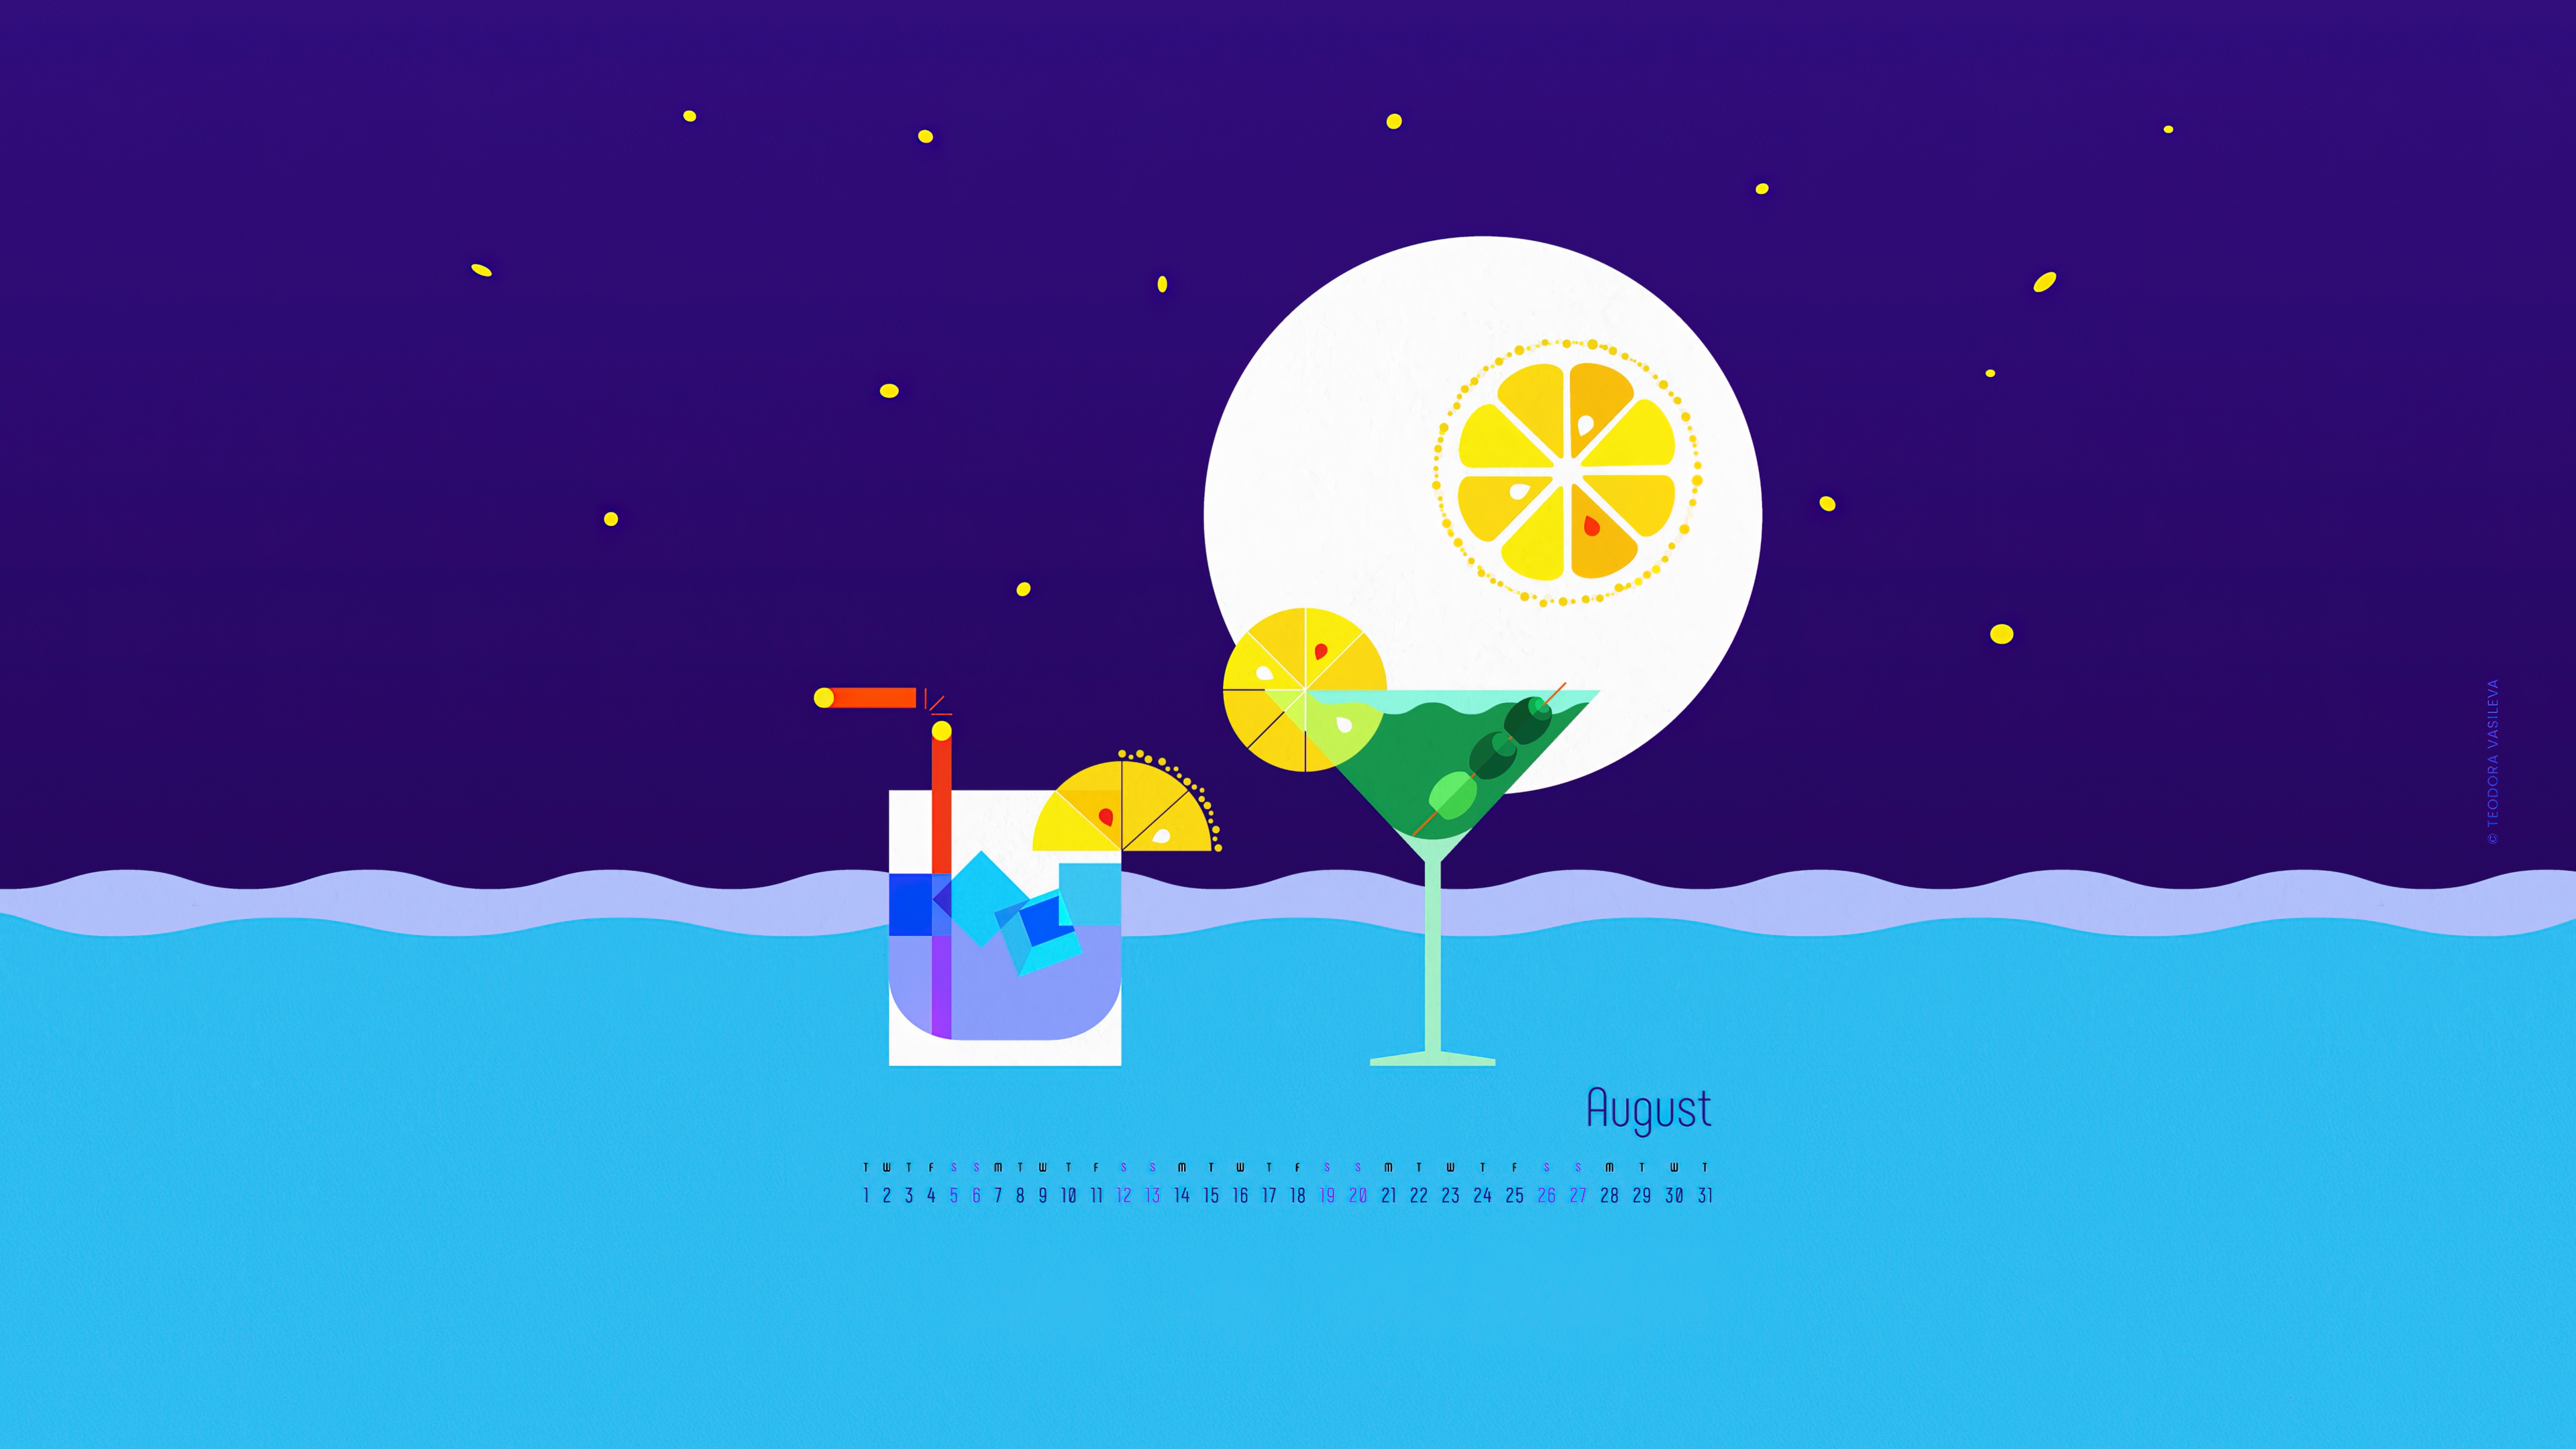 HD wallpaper, Cocktail, Simple, Party Night, 2023, August Calendar